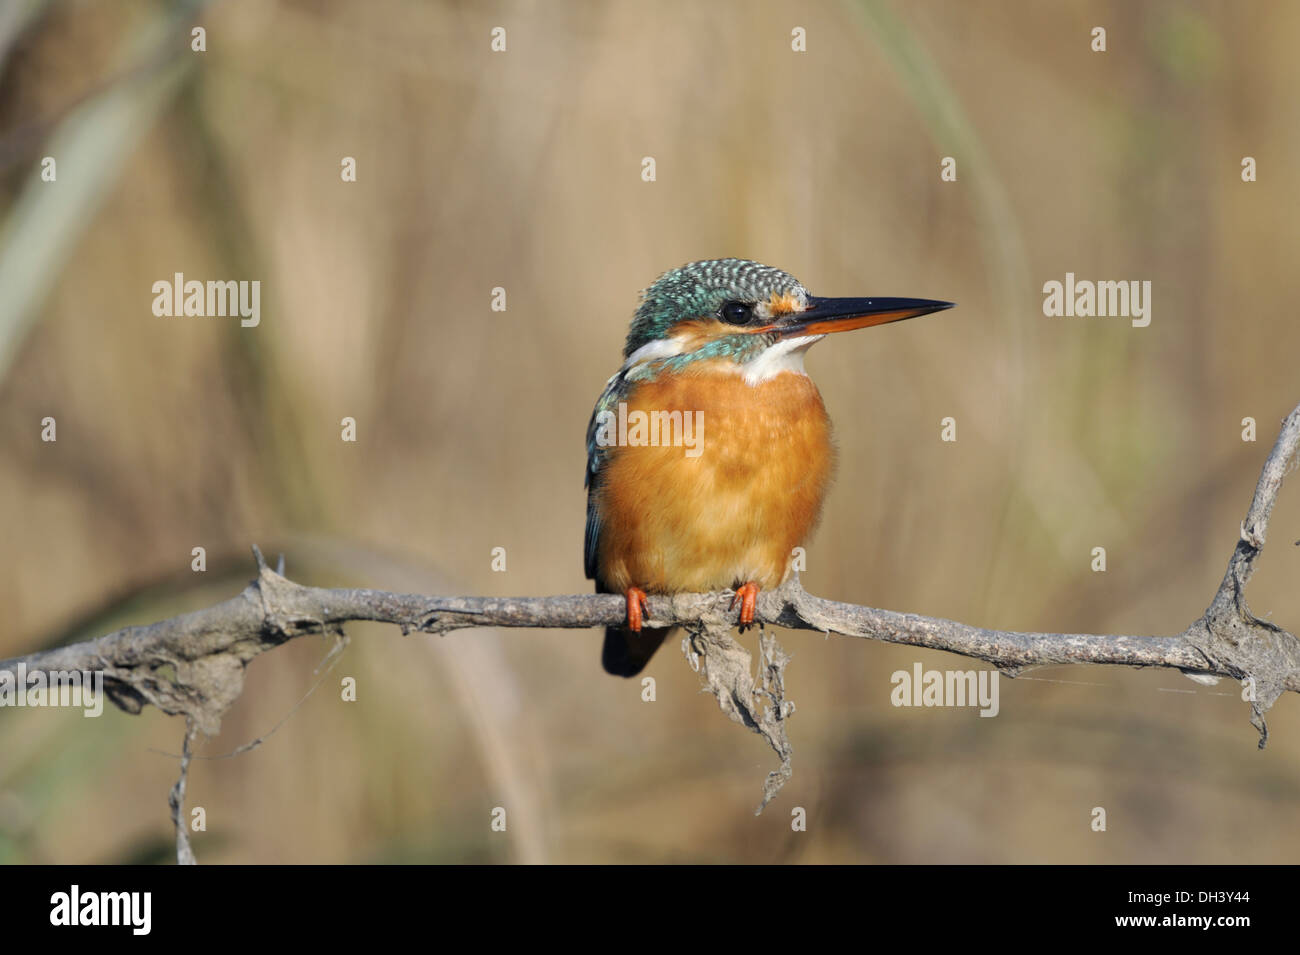 Kingfisher Alcedo atthis Banque D'Images